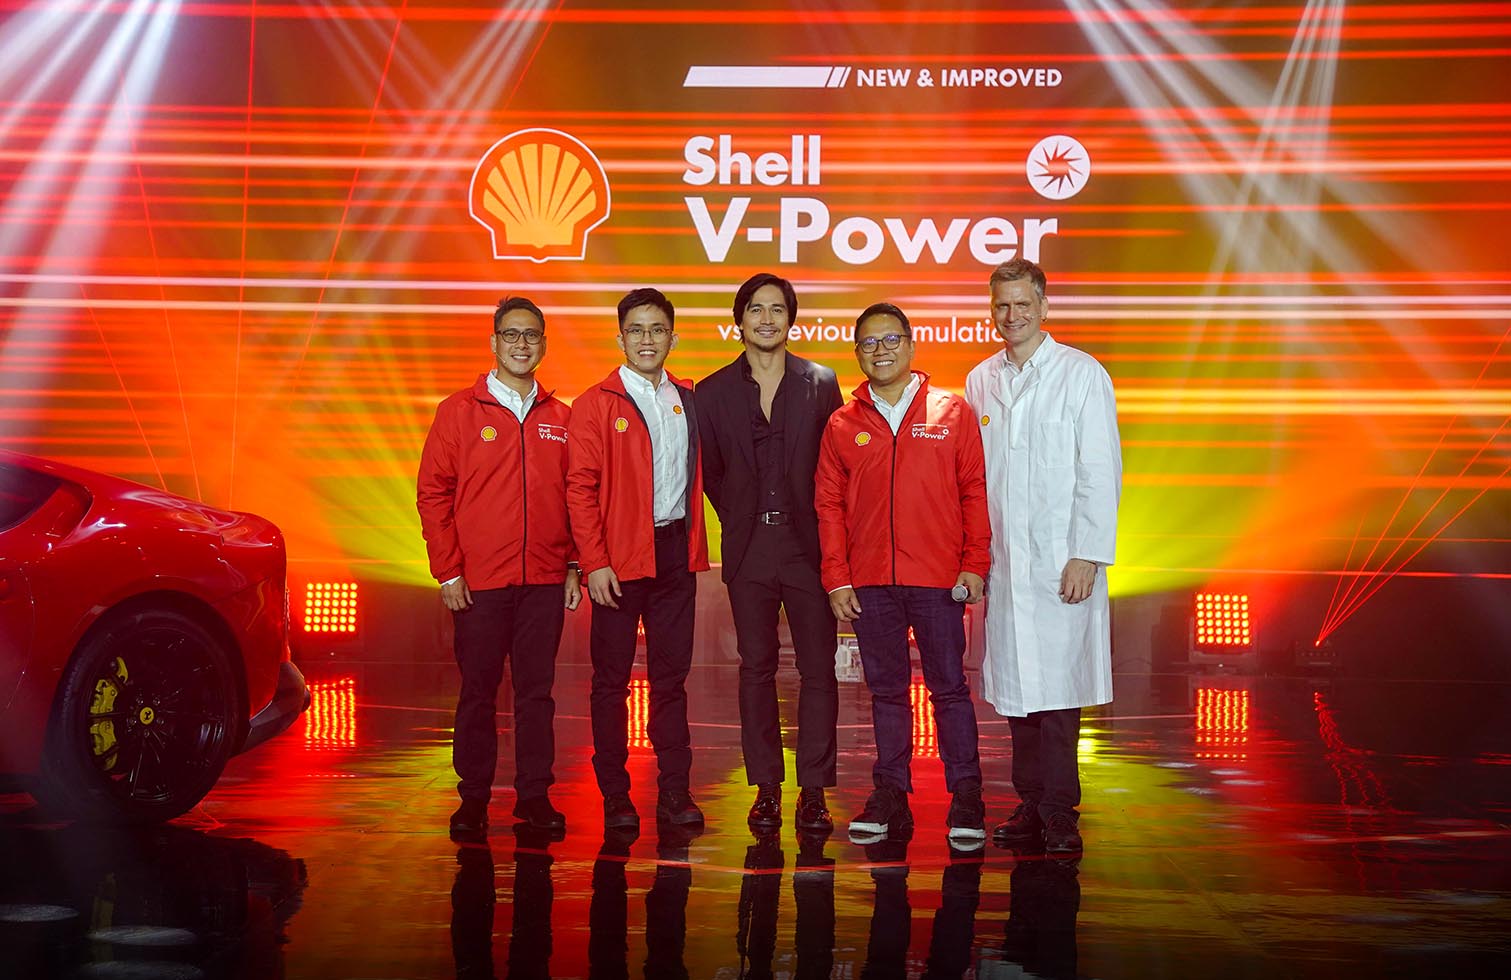 Pilipinas Shell unveils new and improved Shell V-Power fuel and Piolo Pascual as its brand ambassador